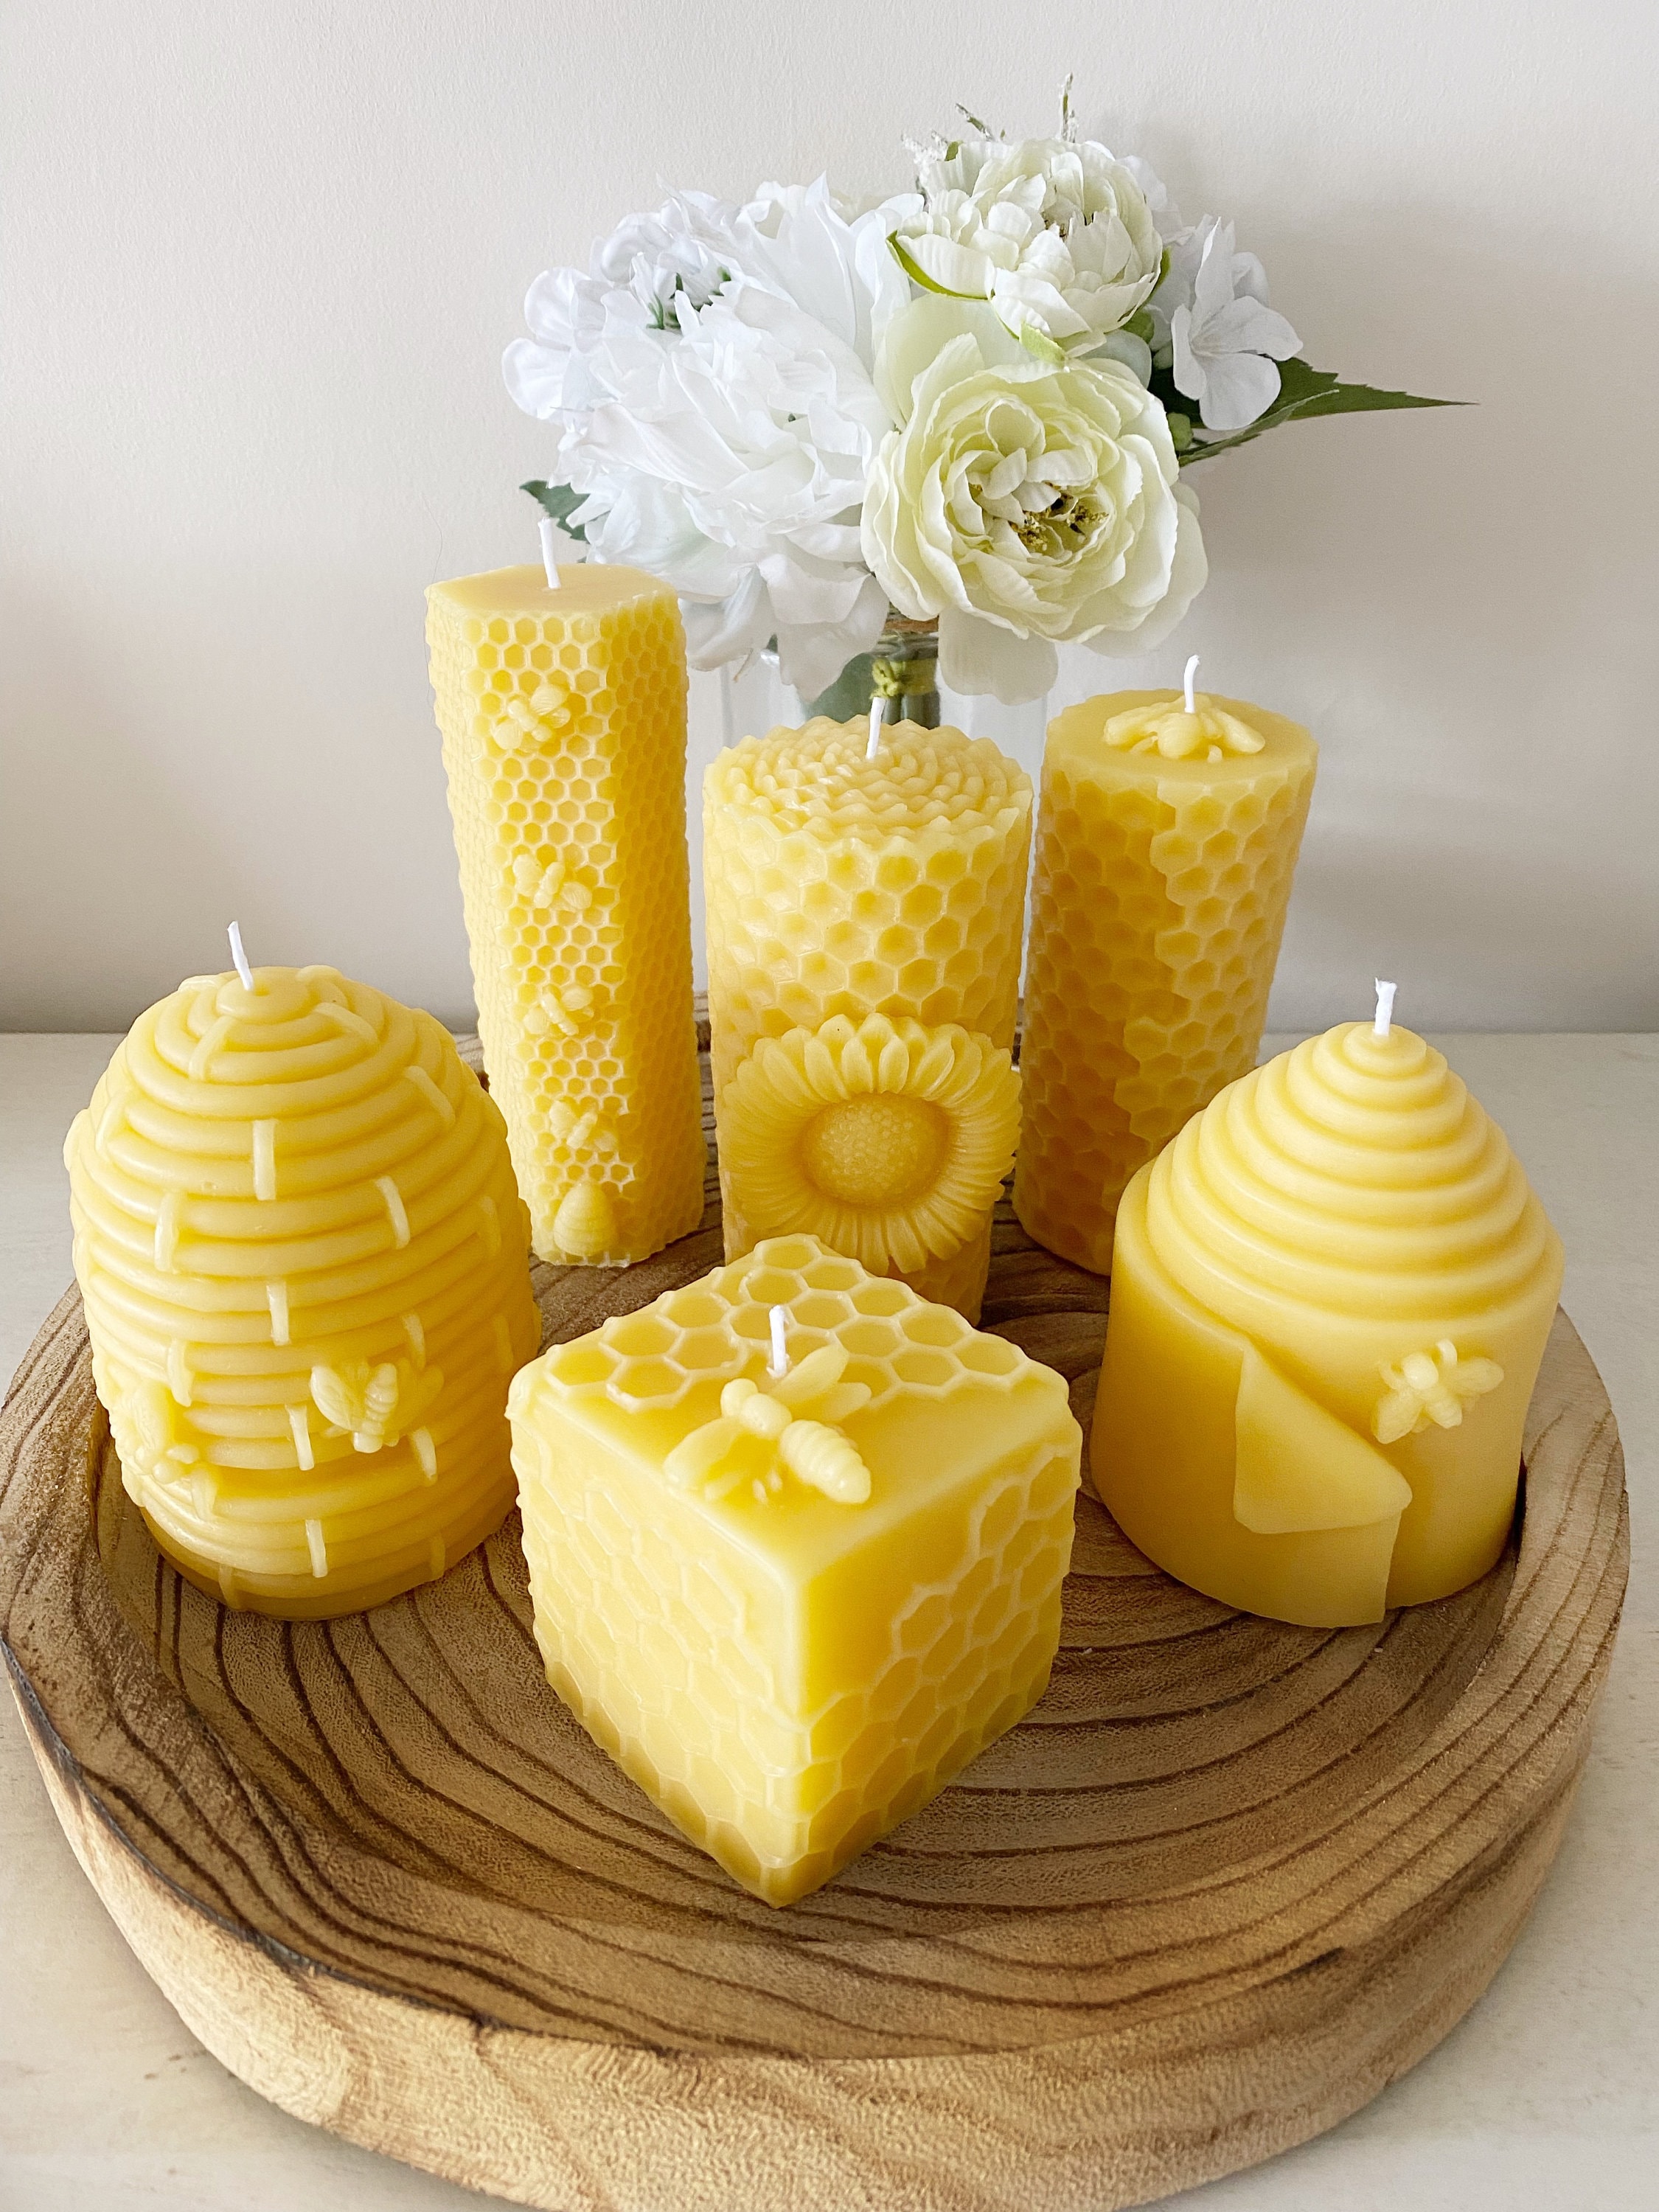 Honey Bee Beeswax Candles/decorative Candles/bee Hive Candles/bee  Candles/honeycomb Candles/handmade/candle Gifts/made With 100% Beeswax. 